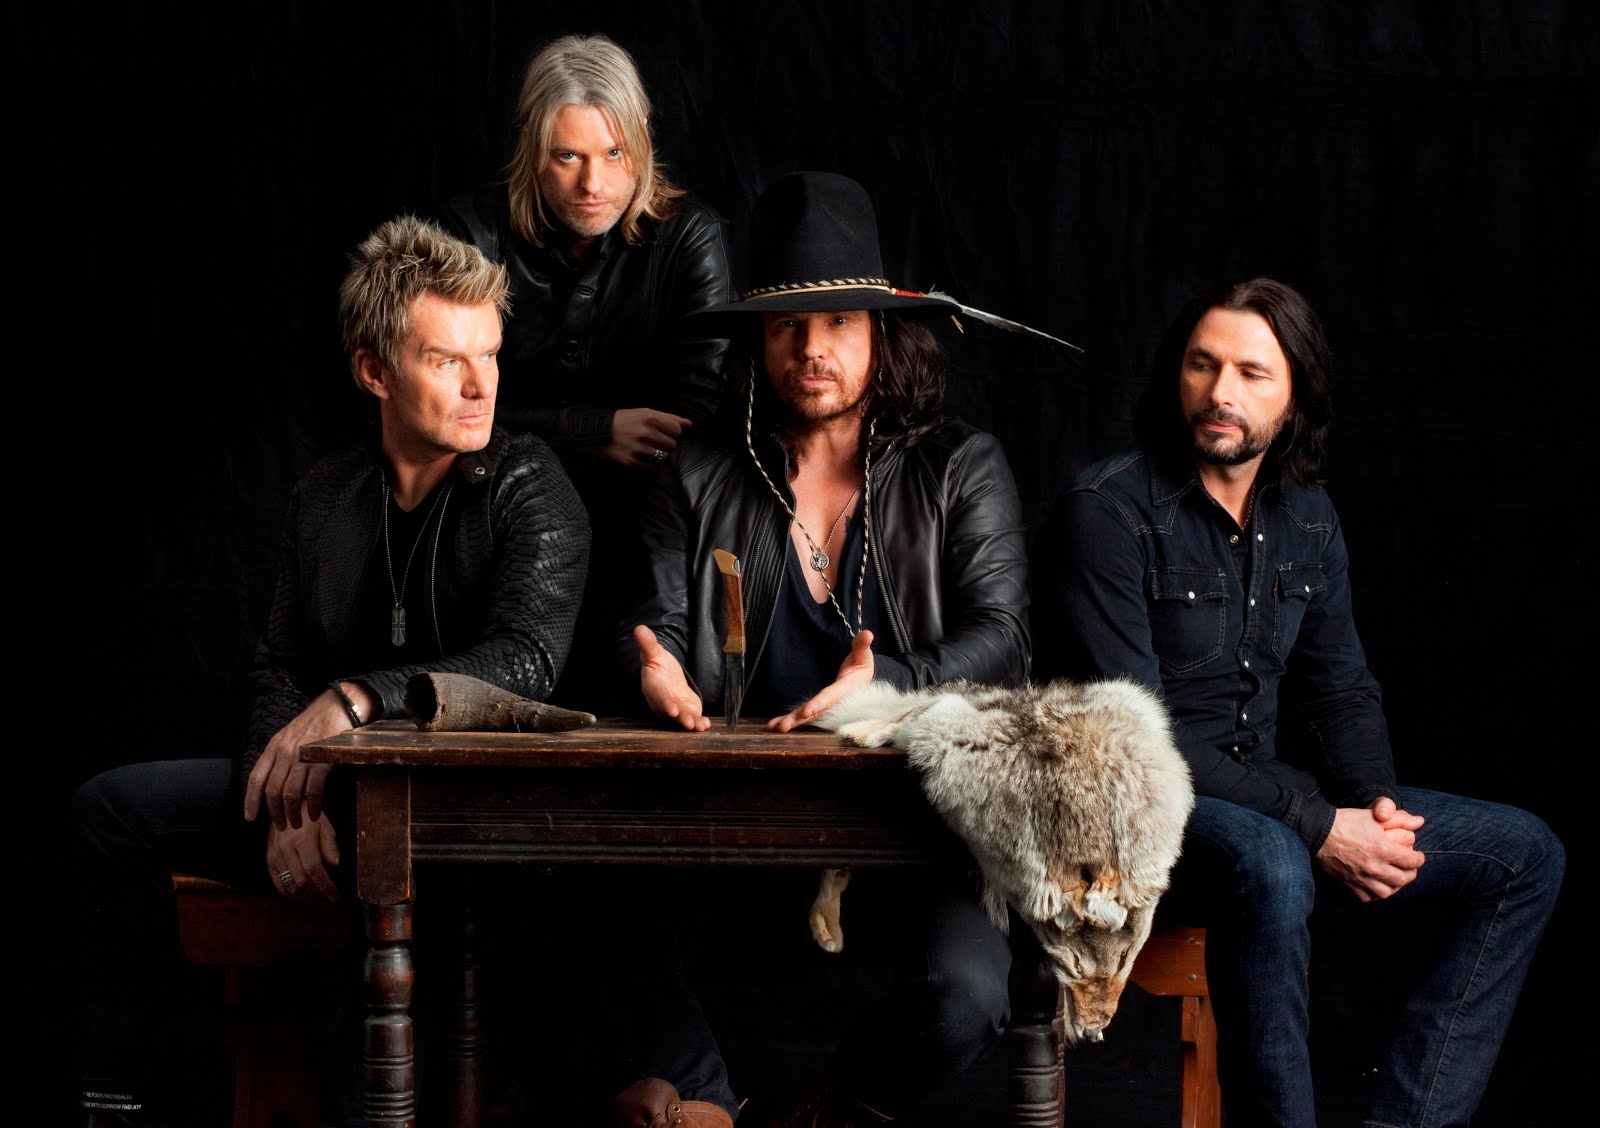 THE CULT announce Electric 13 World Tour – touring Australia this spring